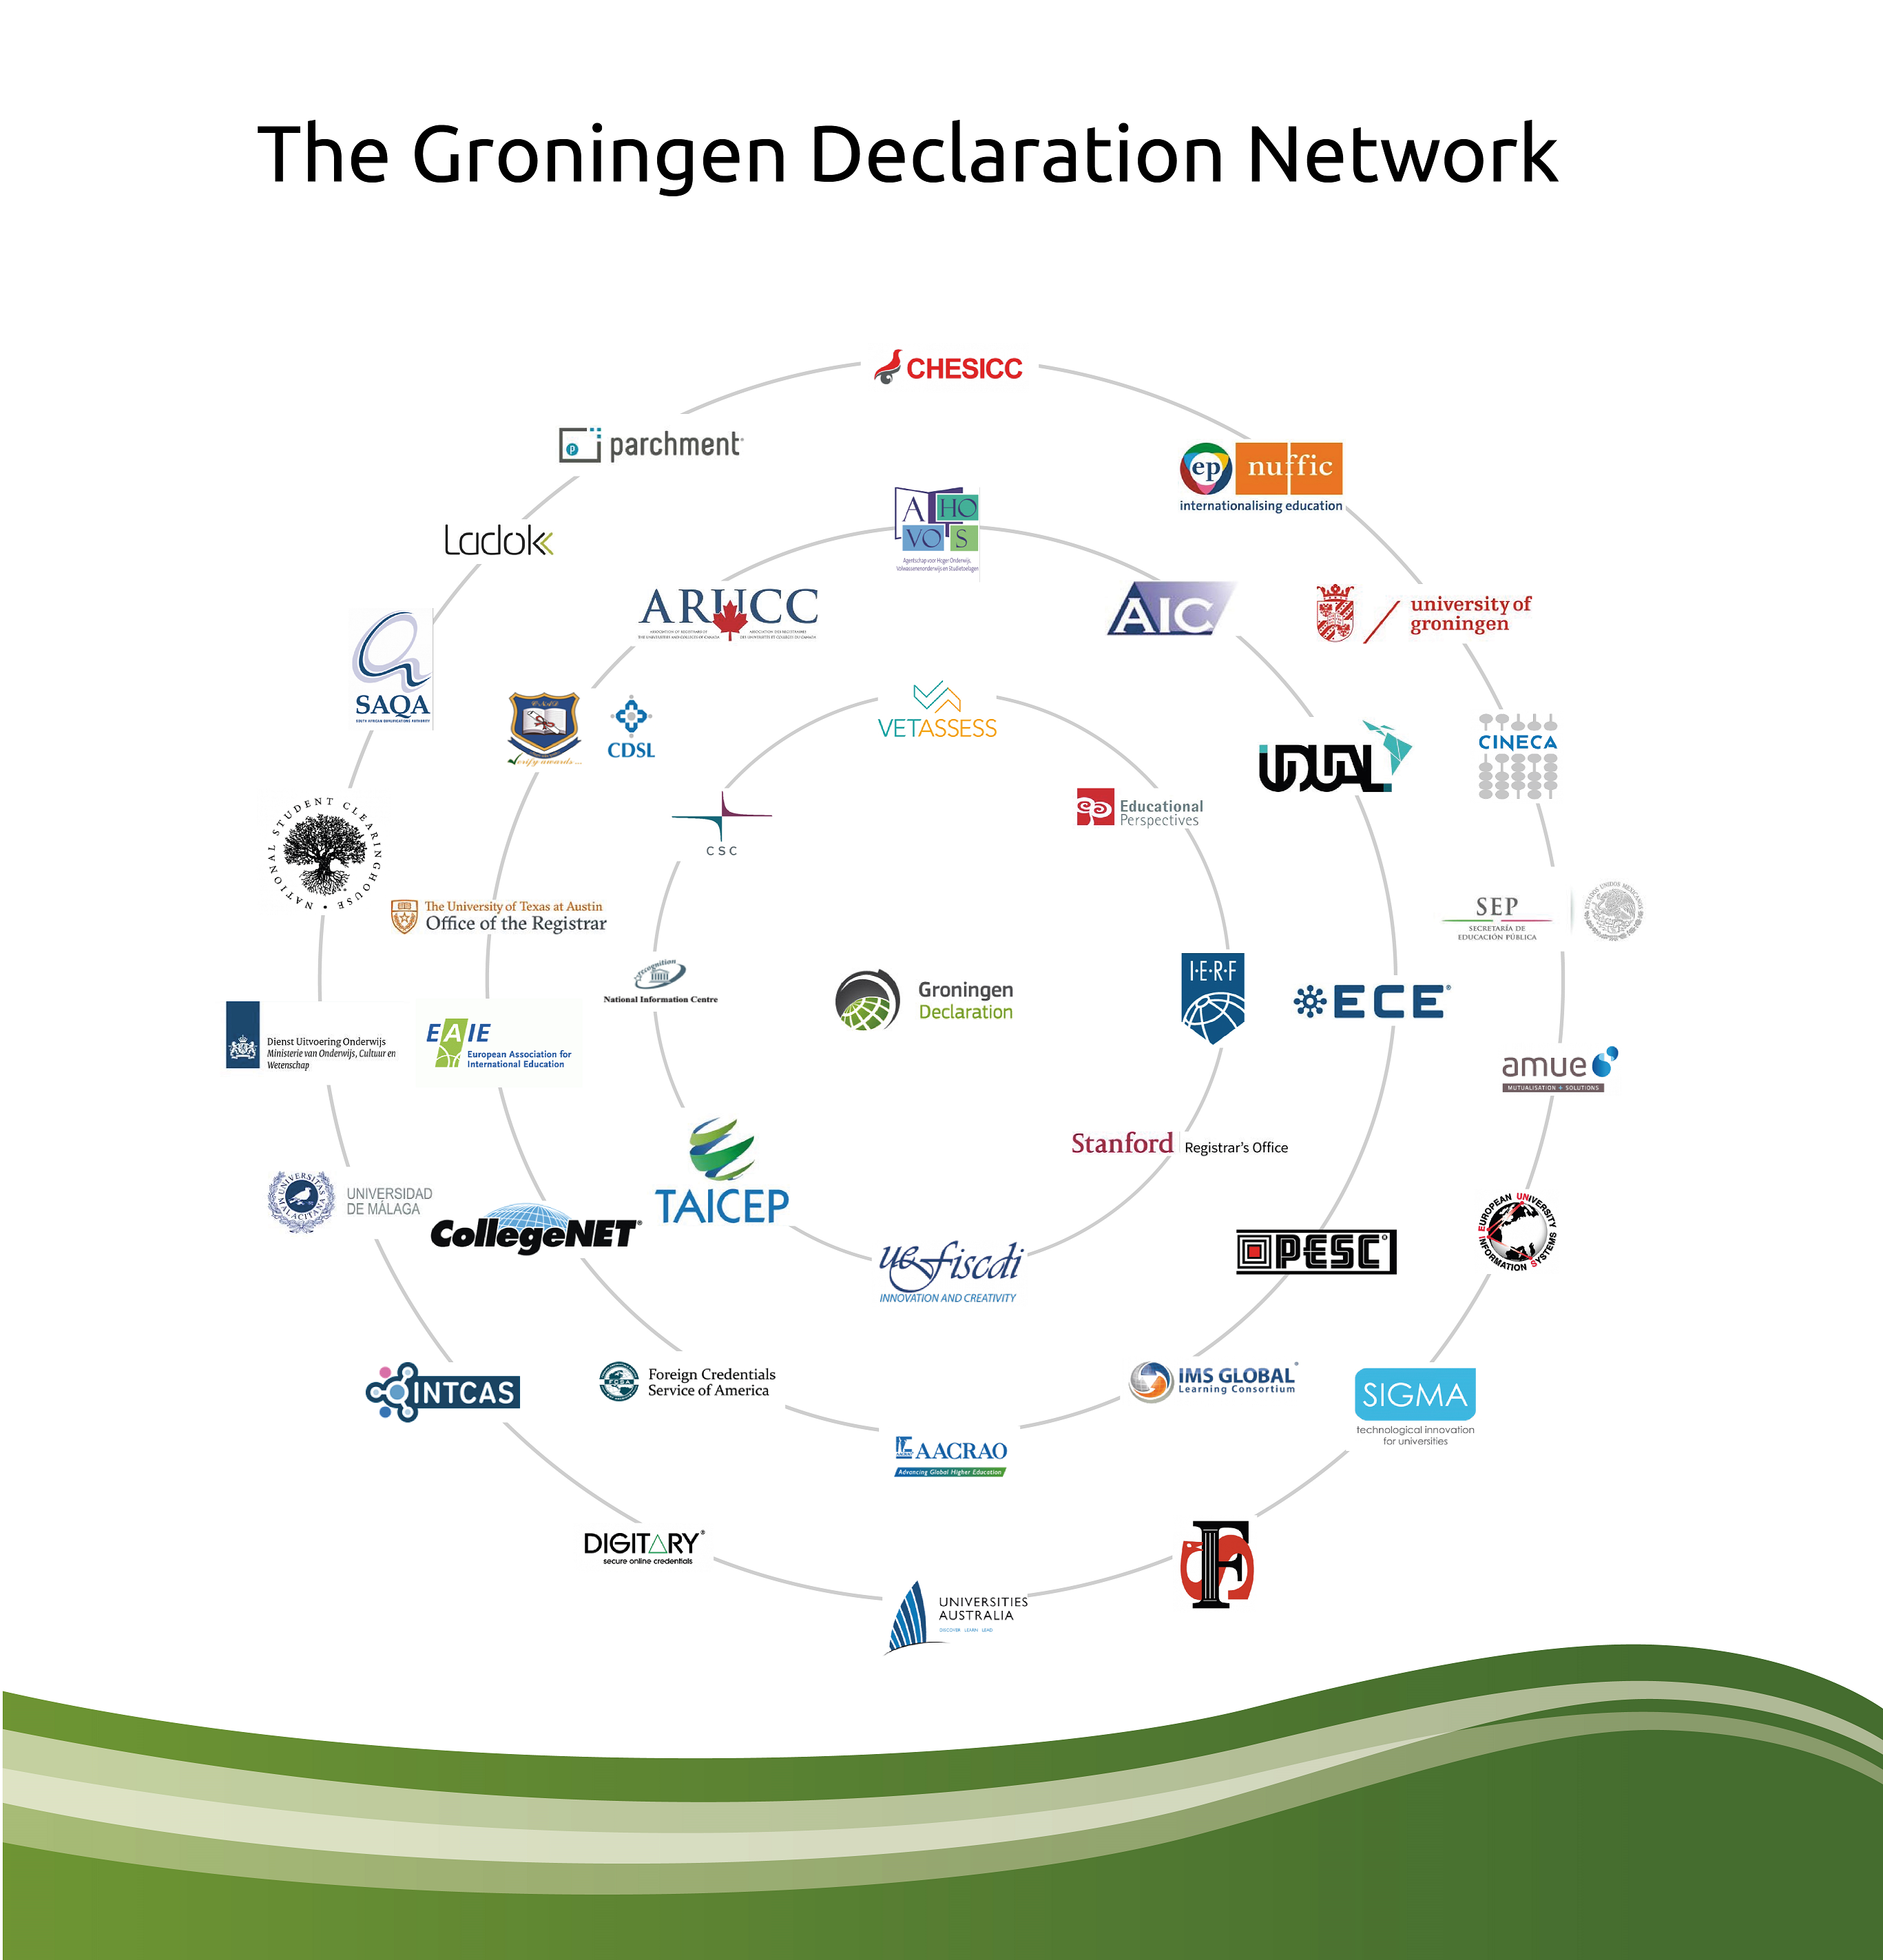 Click to enlarge the GDN Signatory Circle